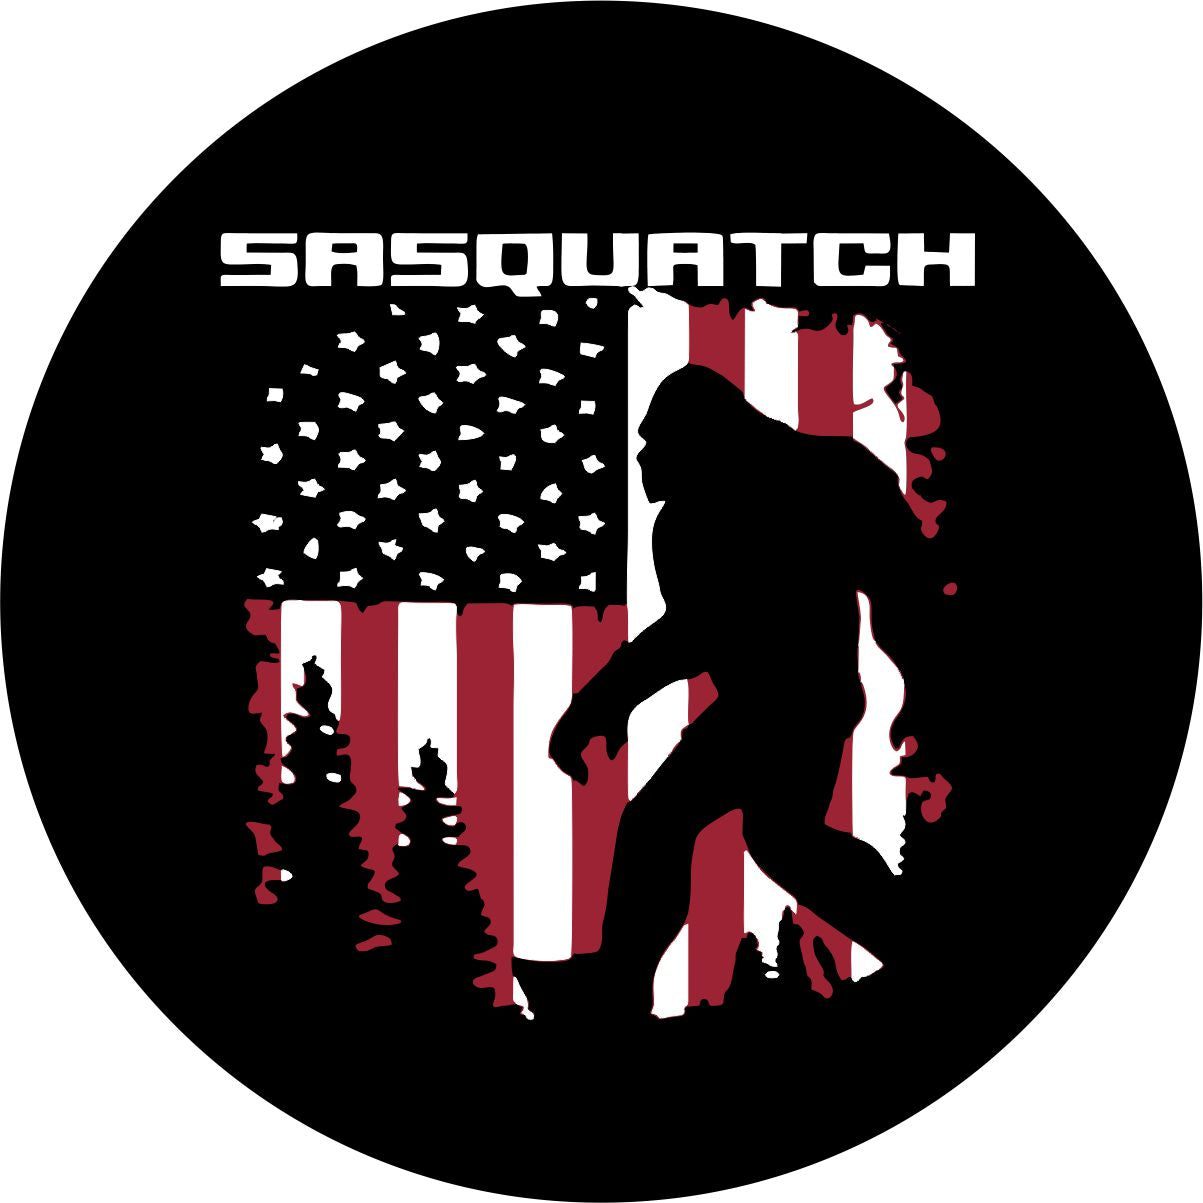 Sasquatch spare tire cover for Jeep, Bronco, campers, RV, van, and more. This spare tire cover design has Bigfoot walking through the forest with a rustic old glory, the American flag, as the background and the name Sasquatch written across the top. 